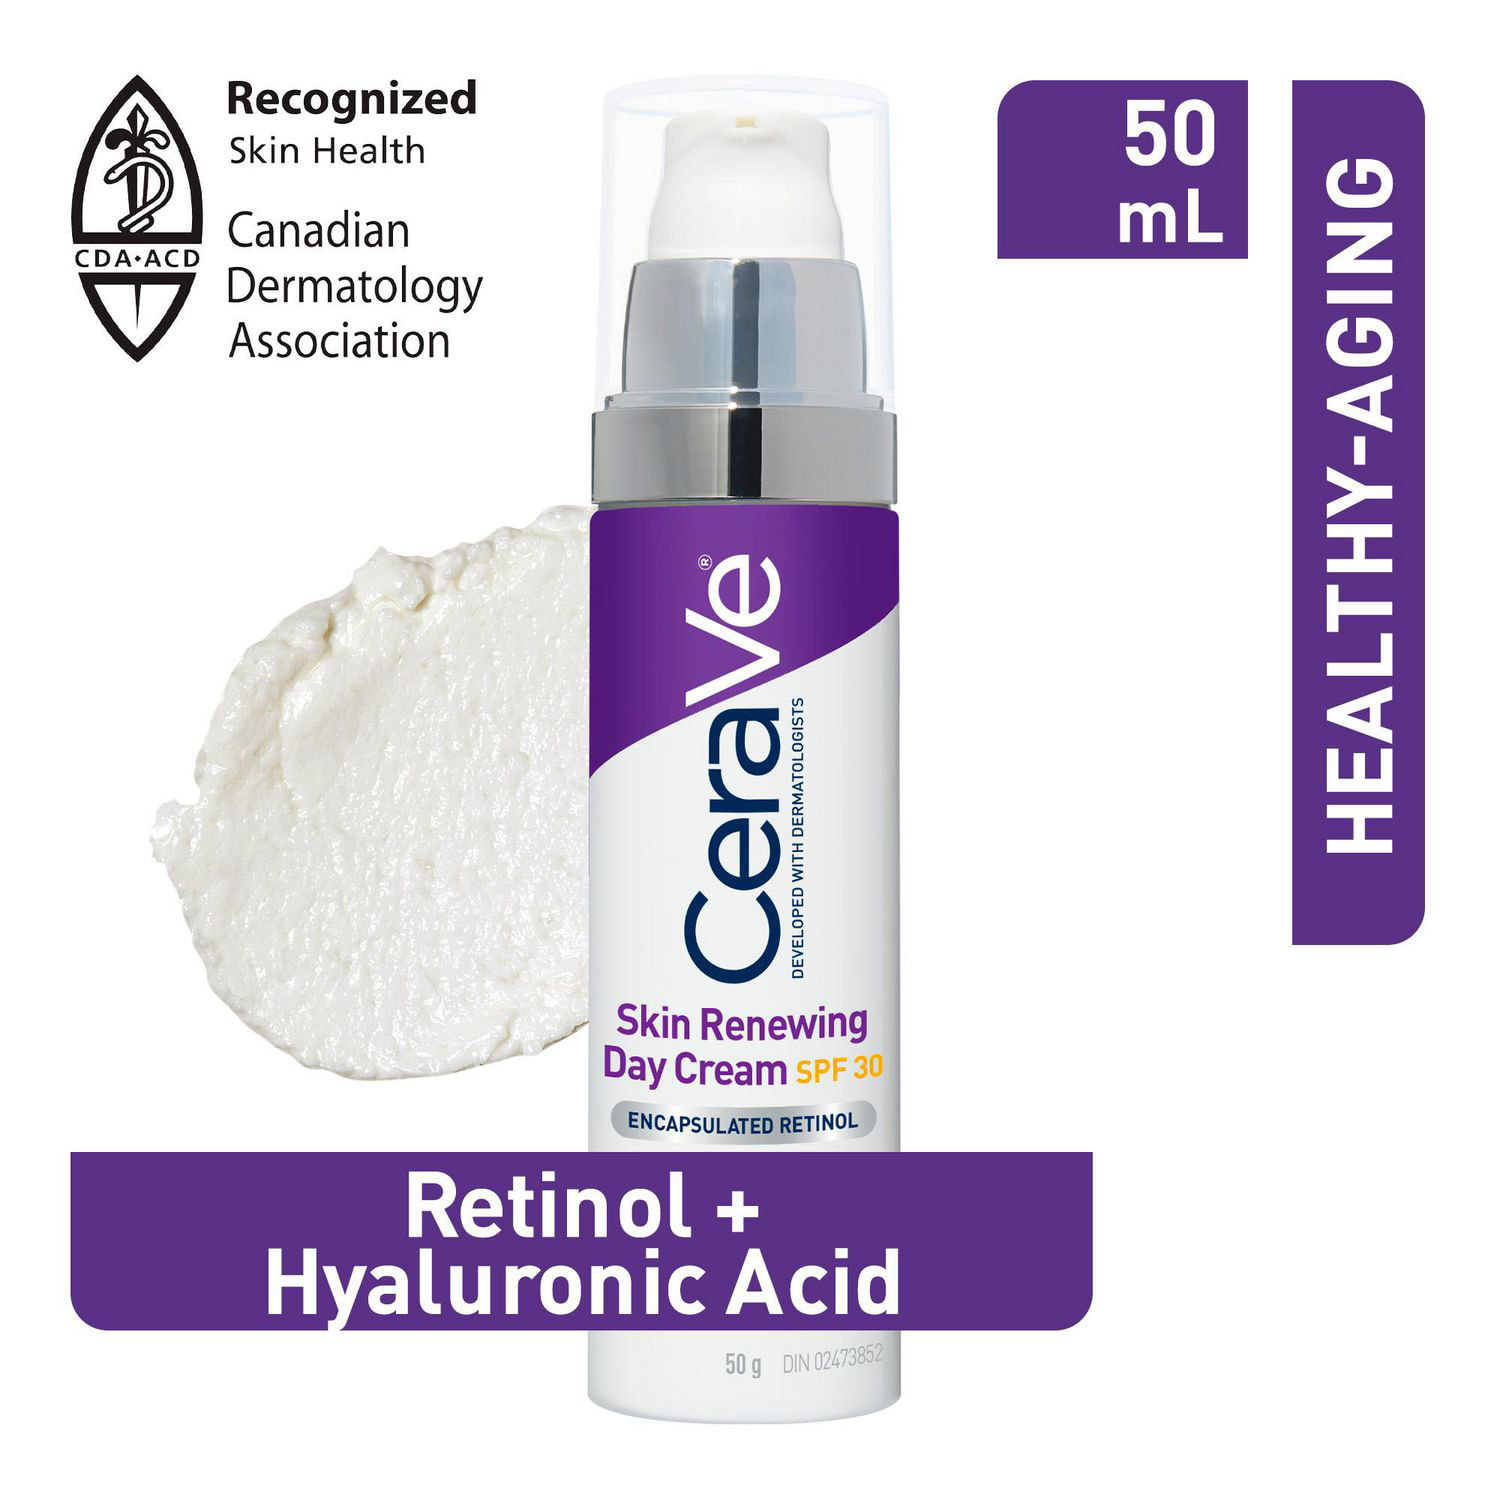 CeraVe Skin Renewing Day Cream for face with Retinol and Sunscreen SPF30   Anti-aging Daily Moisturizing Cream for Fine Lines & Wrinkles with  ceramides, hyaluronic acid & broad spectrum sun protection, Fragrance